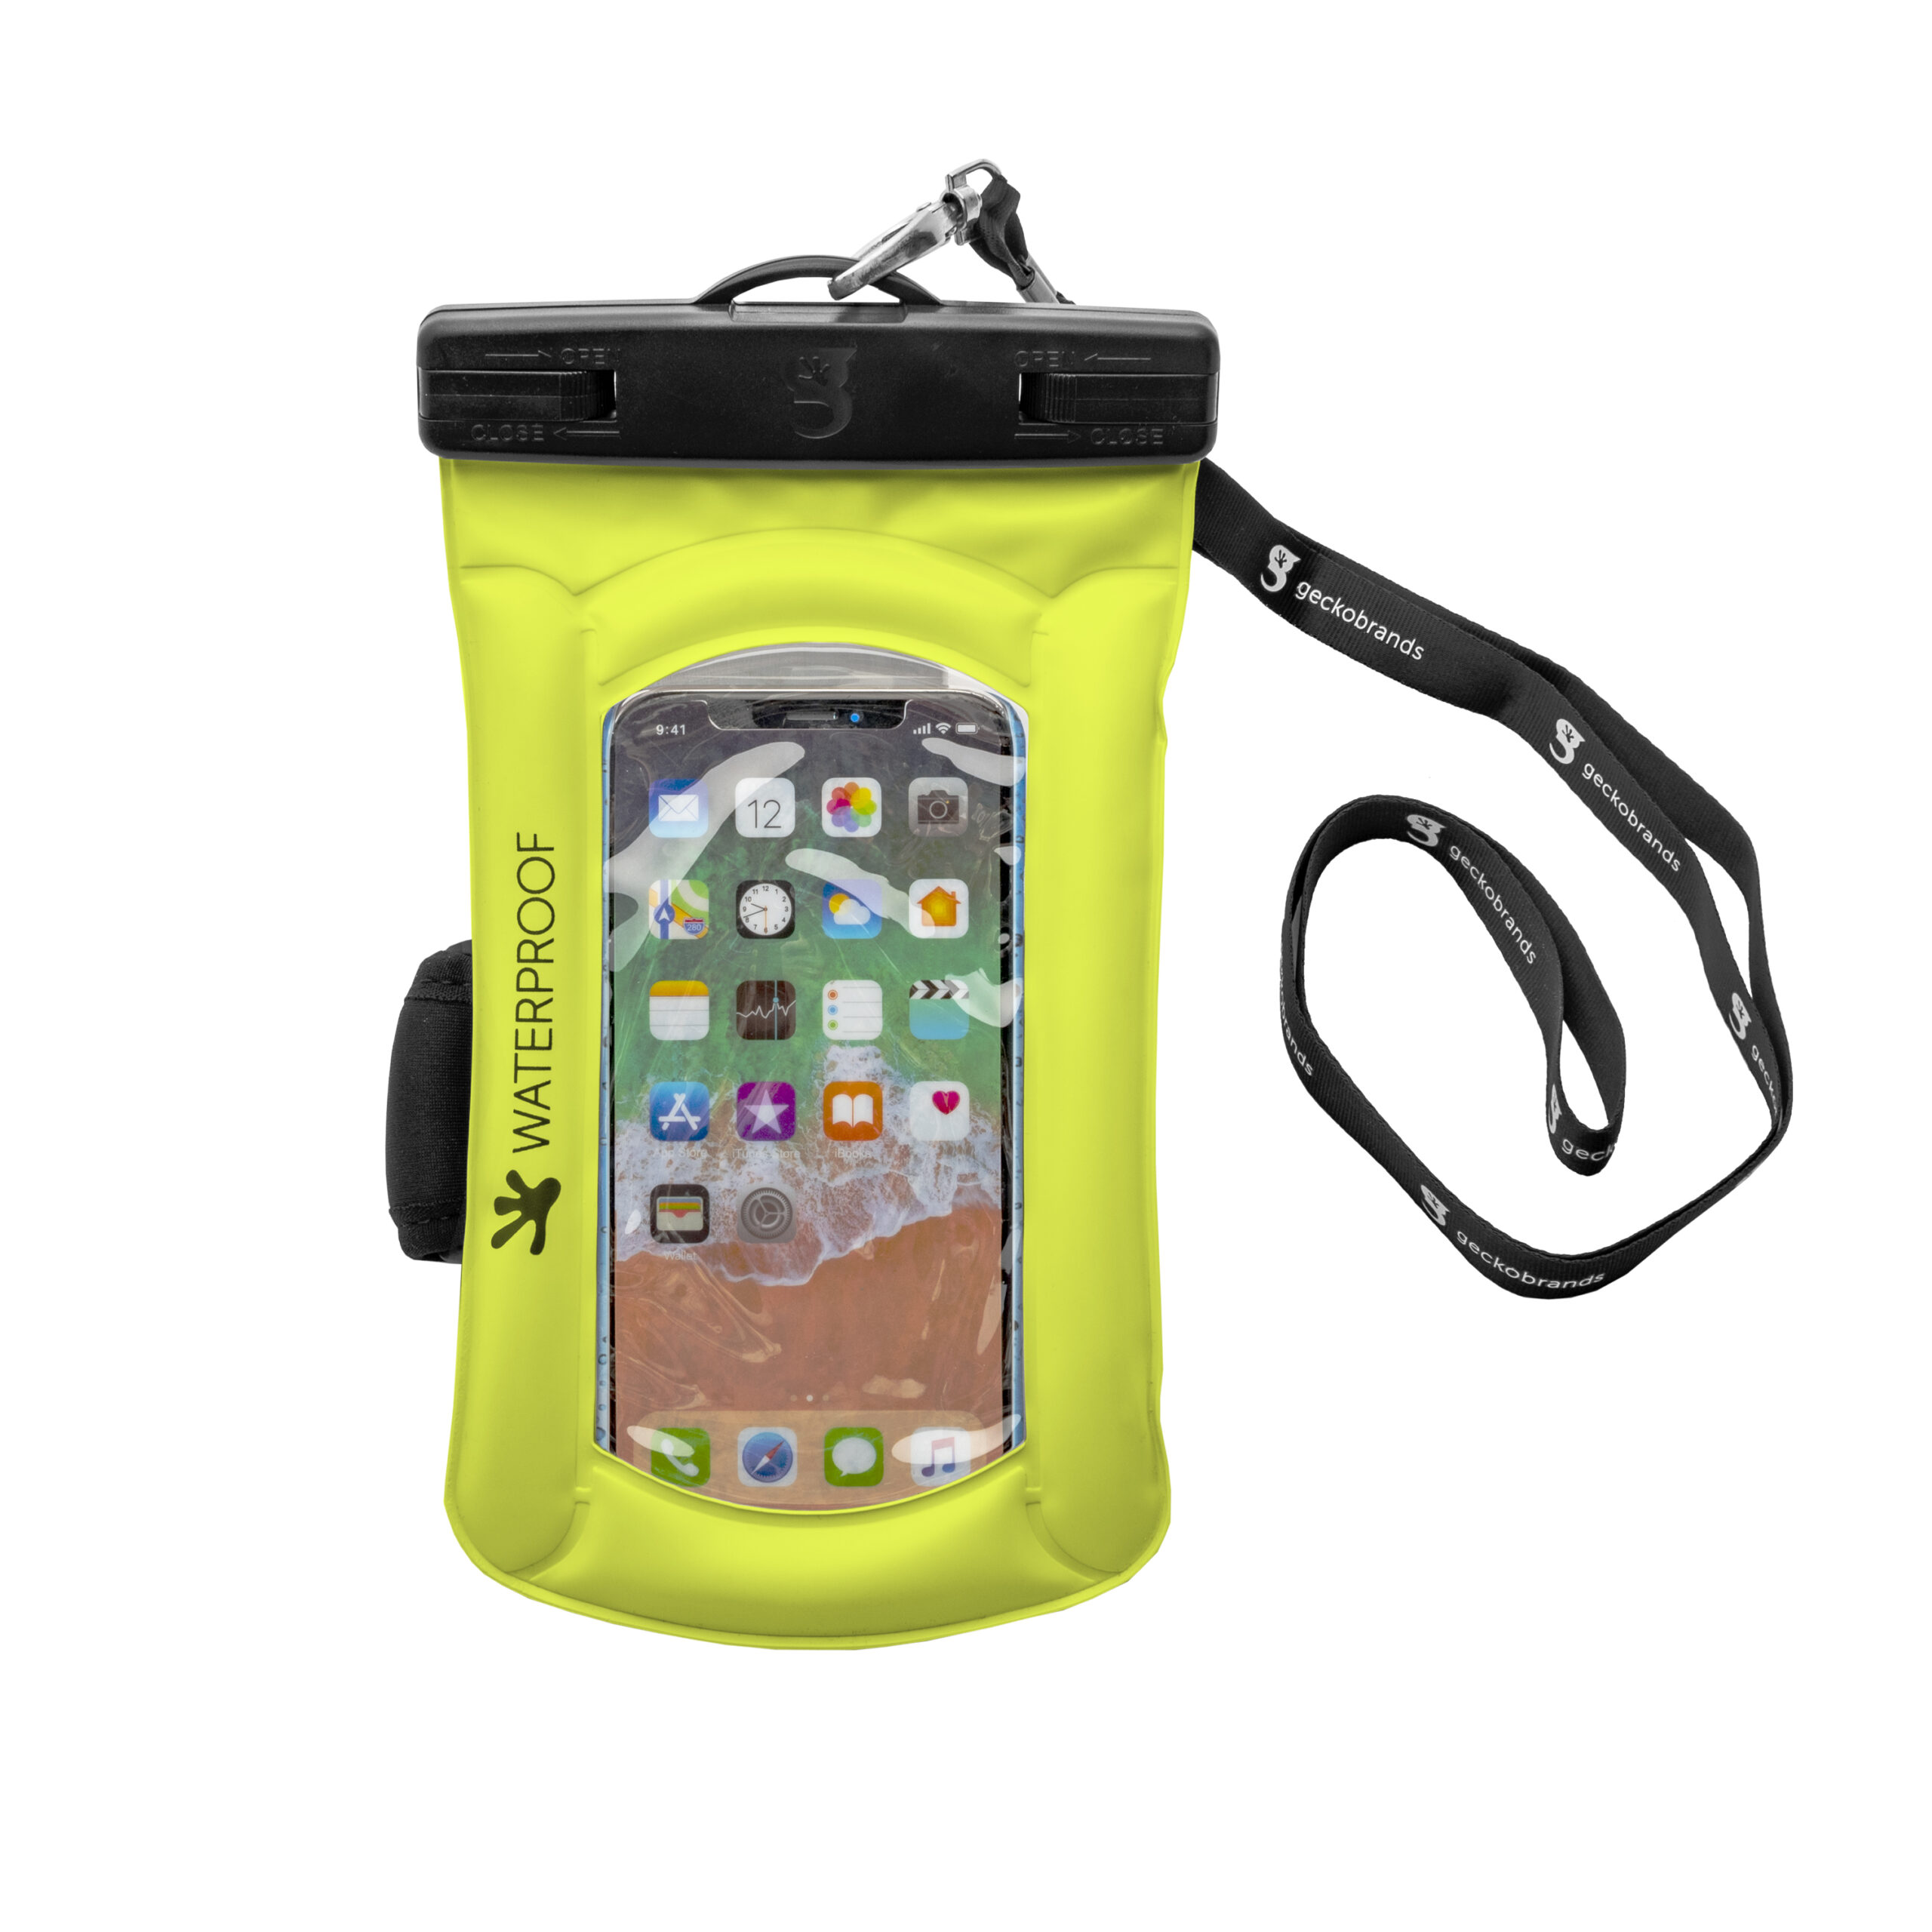 Float phone dry bag with arm band Green Geckobrands - Angler